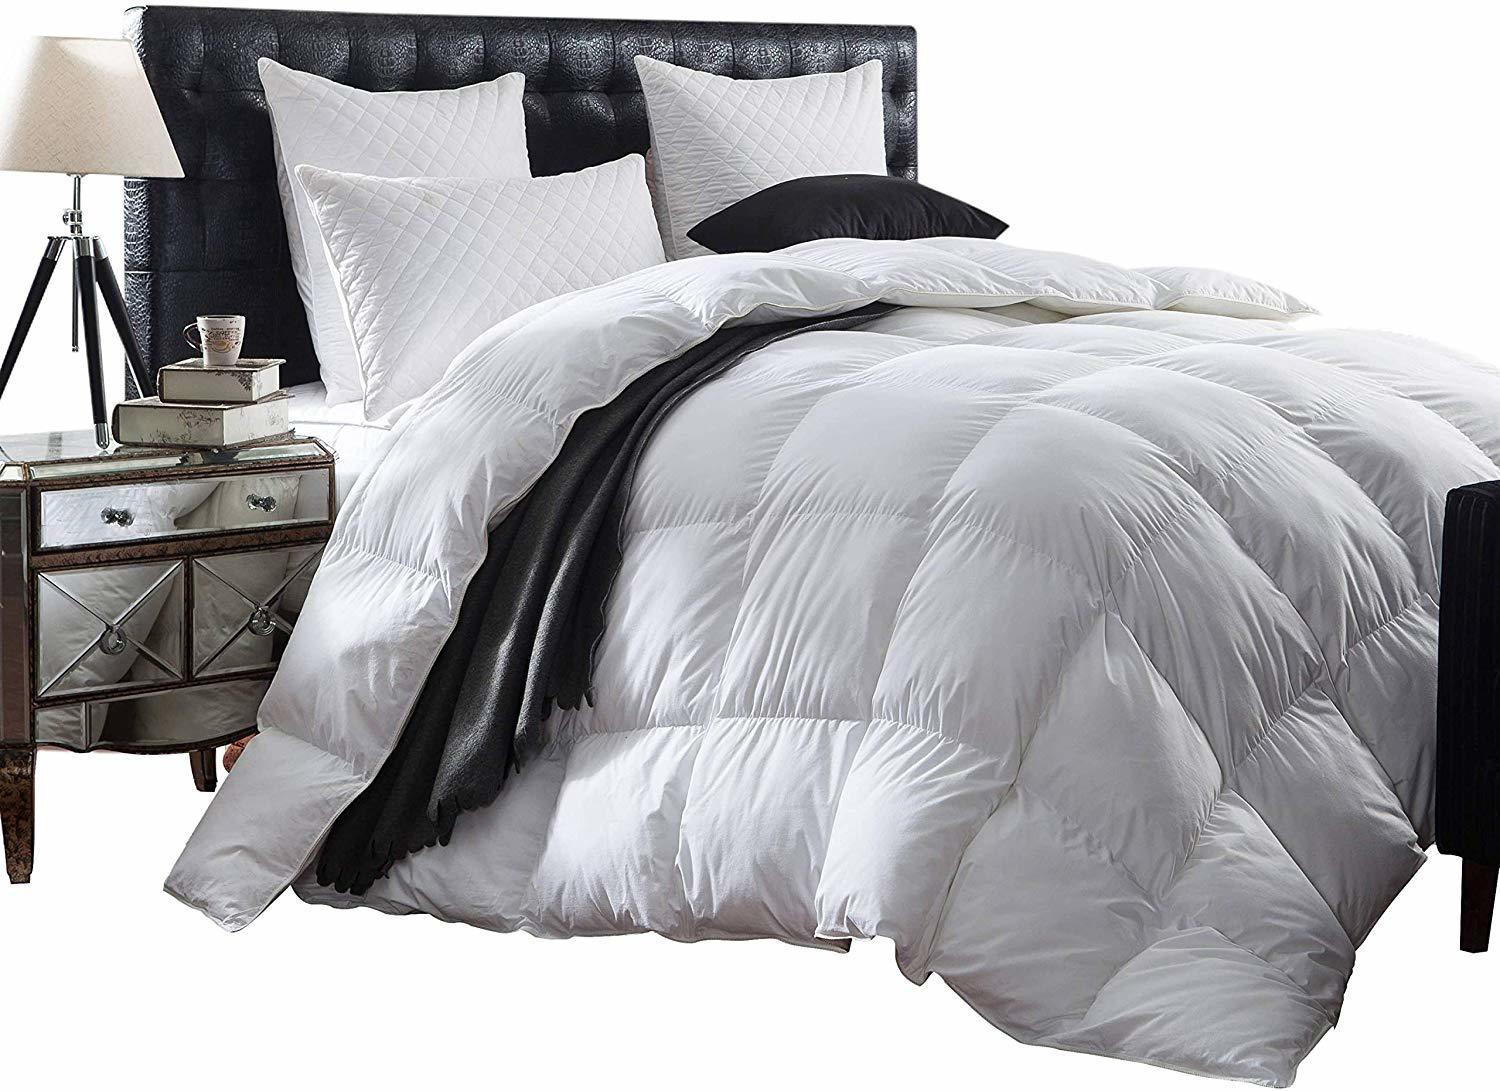 Best Lightweight Down Comforters In 2021 Reviews and Buying Guide